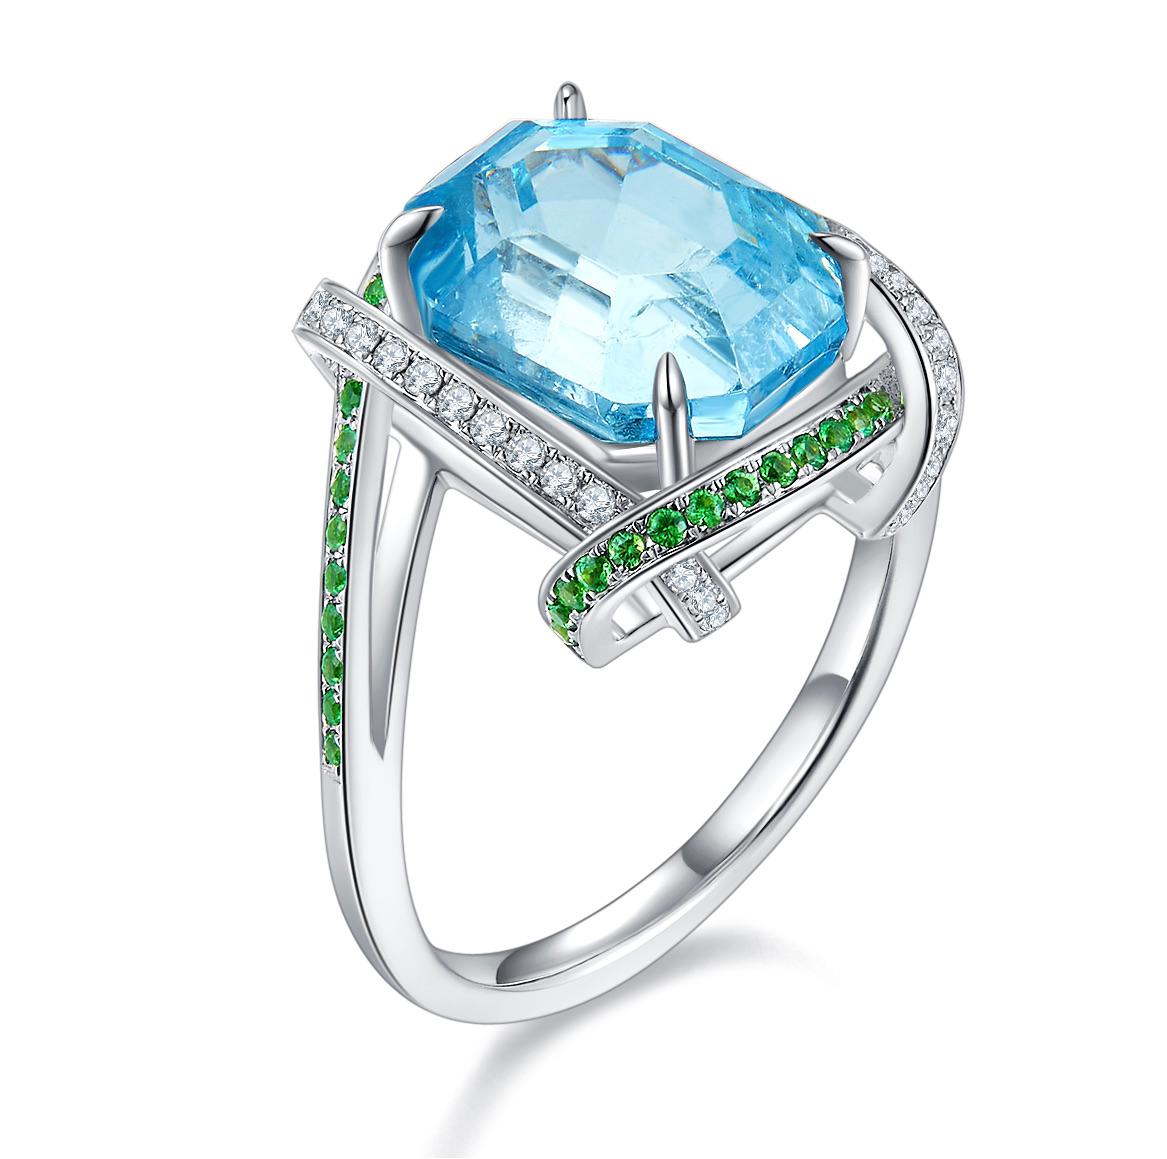 Aquamarine, Tsavorite and Diamond Ring in 18k White Gold. The Octagonal Aquamarine is encircled by 4 lines of pave setting. The Lines of pave is alternating between Tsavorite and Diamond in a ribbon like design. It is giving the ribbon wrapping kind